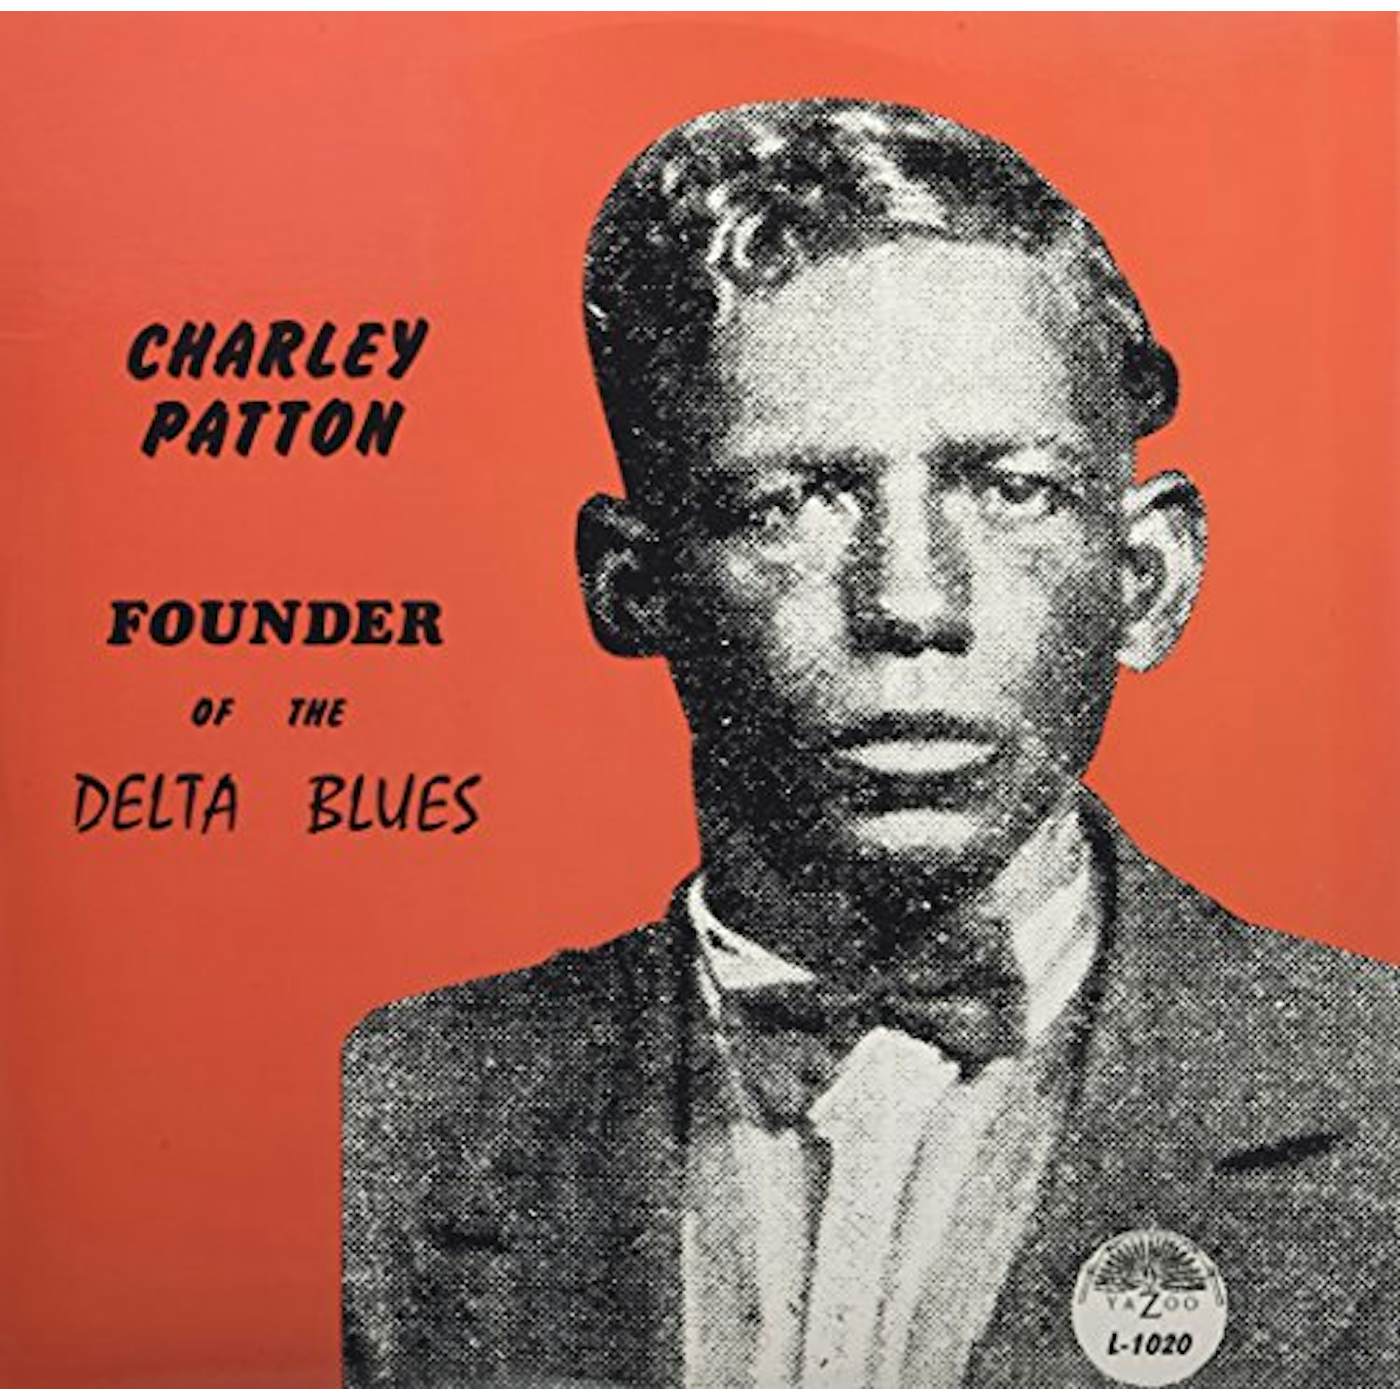 Charley Patton Founder of the Delta Blues Vinyl Record